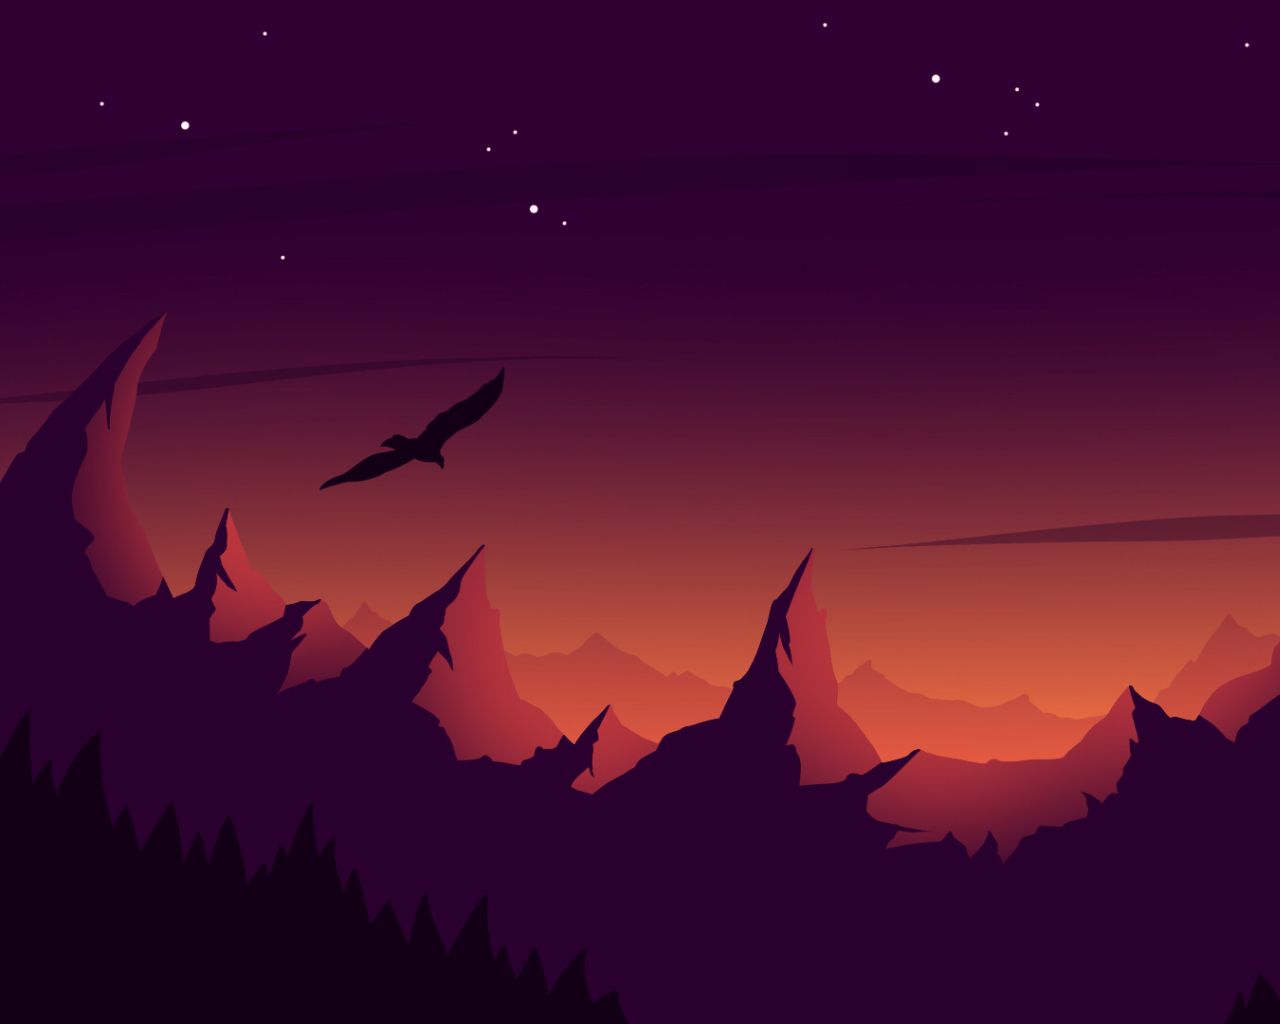 A night scene with mountains and trees - 1280x1024